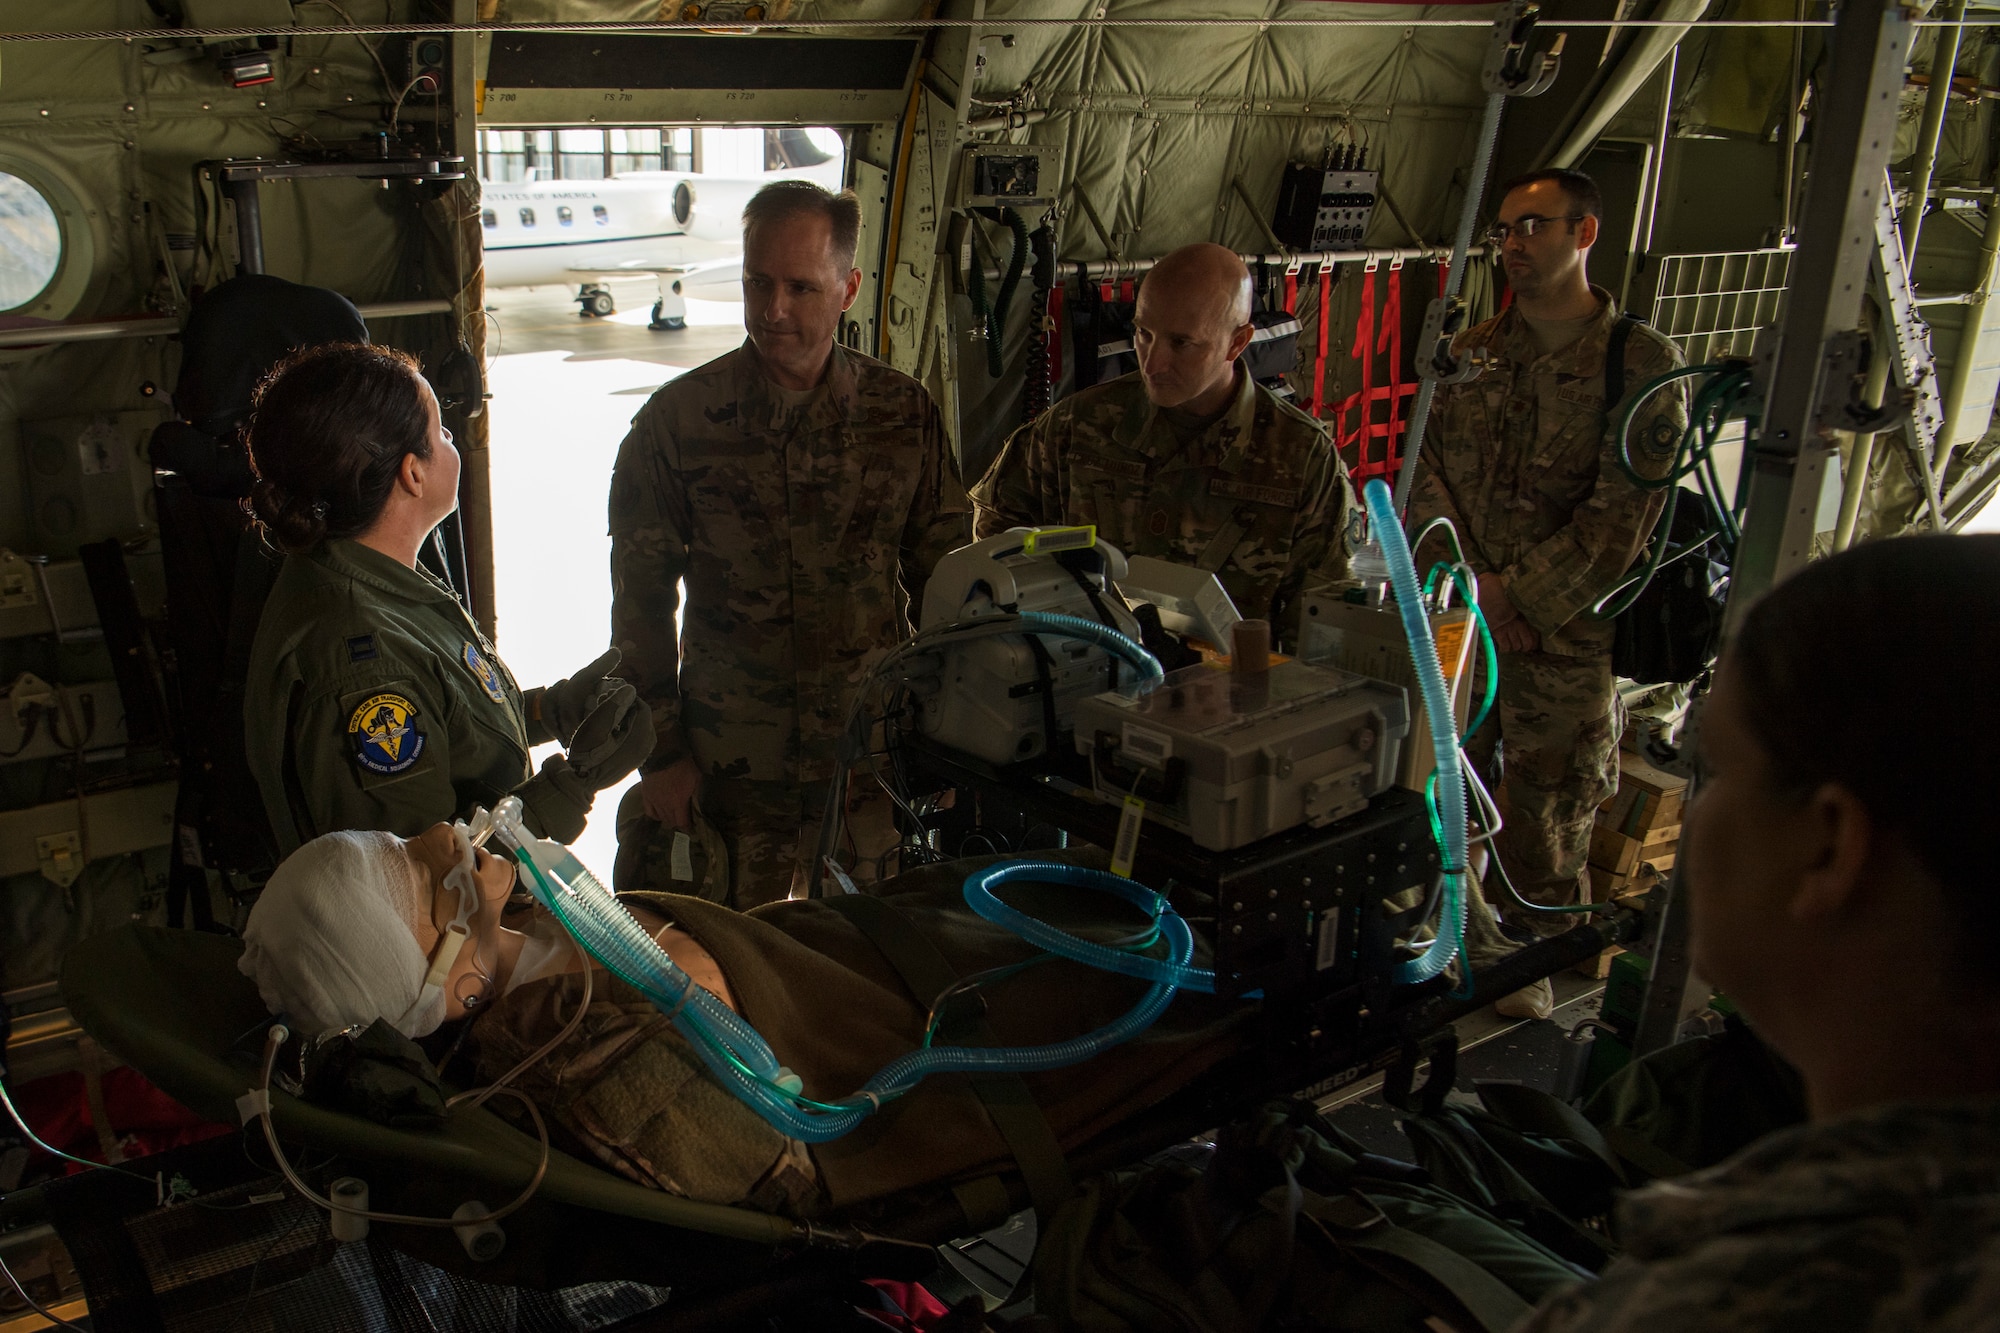 U.S. Air Force Capt. April Oliver, 86th Medical Squadron Critical Care Air Transport Team nurse, briefs Maj. Gen. John Wood, Third Air Force commander during a tour with the 86th Airlift Wing Oct. 5, 2018, at Ramstein Air Base, Germany. Falling under the Third Air Force, members of the 86th further explained the successful role they play in Ramstein’s diverse mission. (U.S. Air Force photo by Senior Airman Devin M. Rumbaugh)